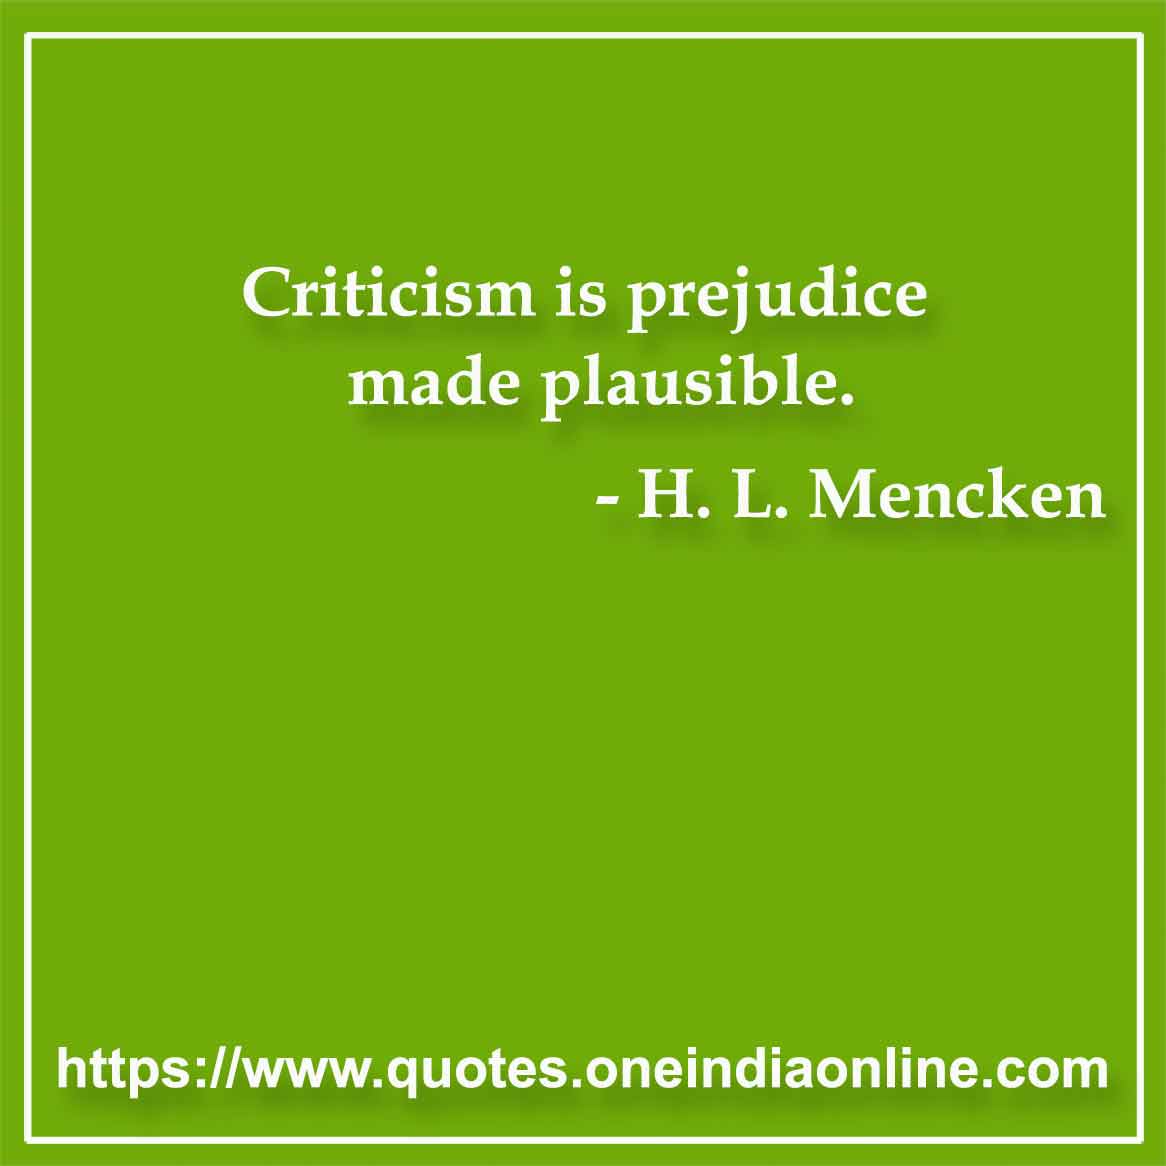 Criticism is prejudice made plausible.

- Prejudice Quotes by H. L. Mencken